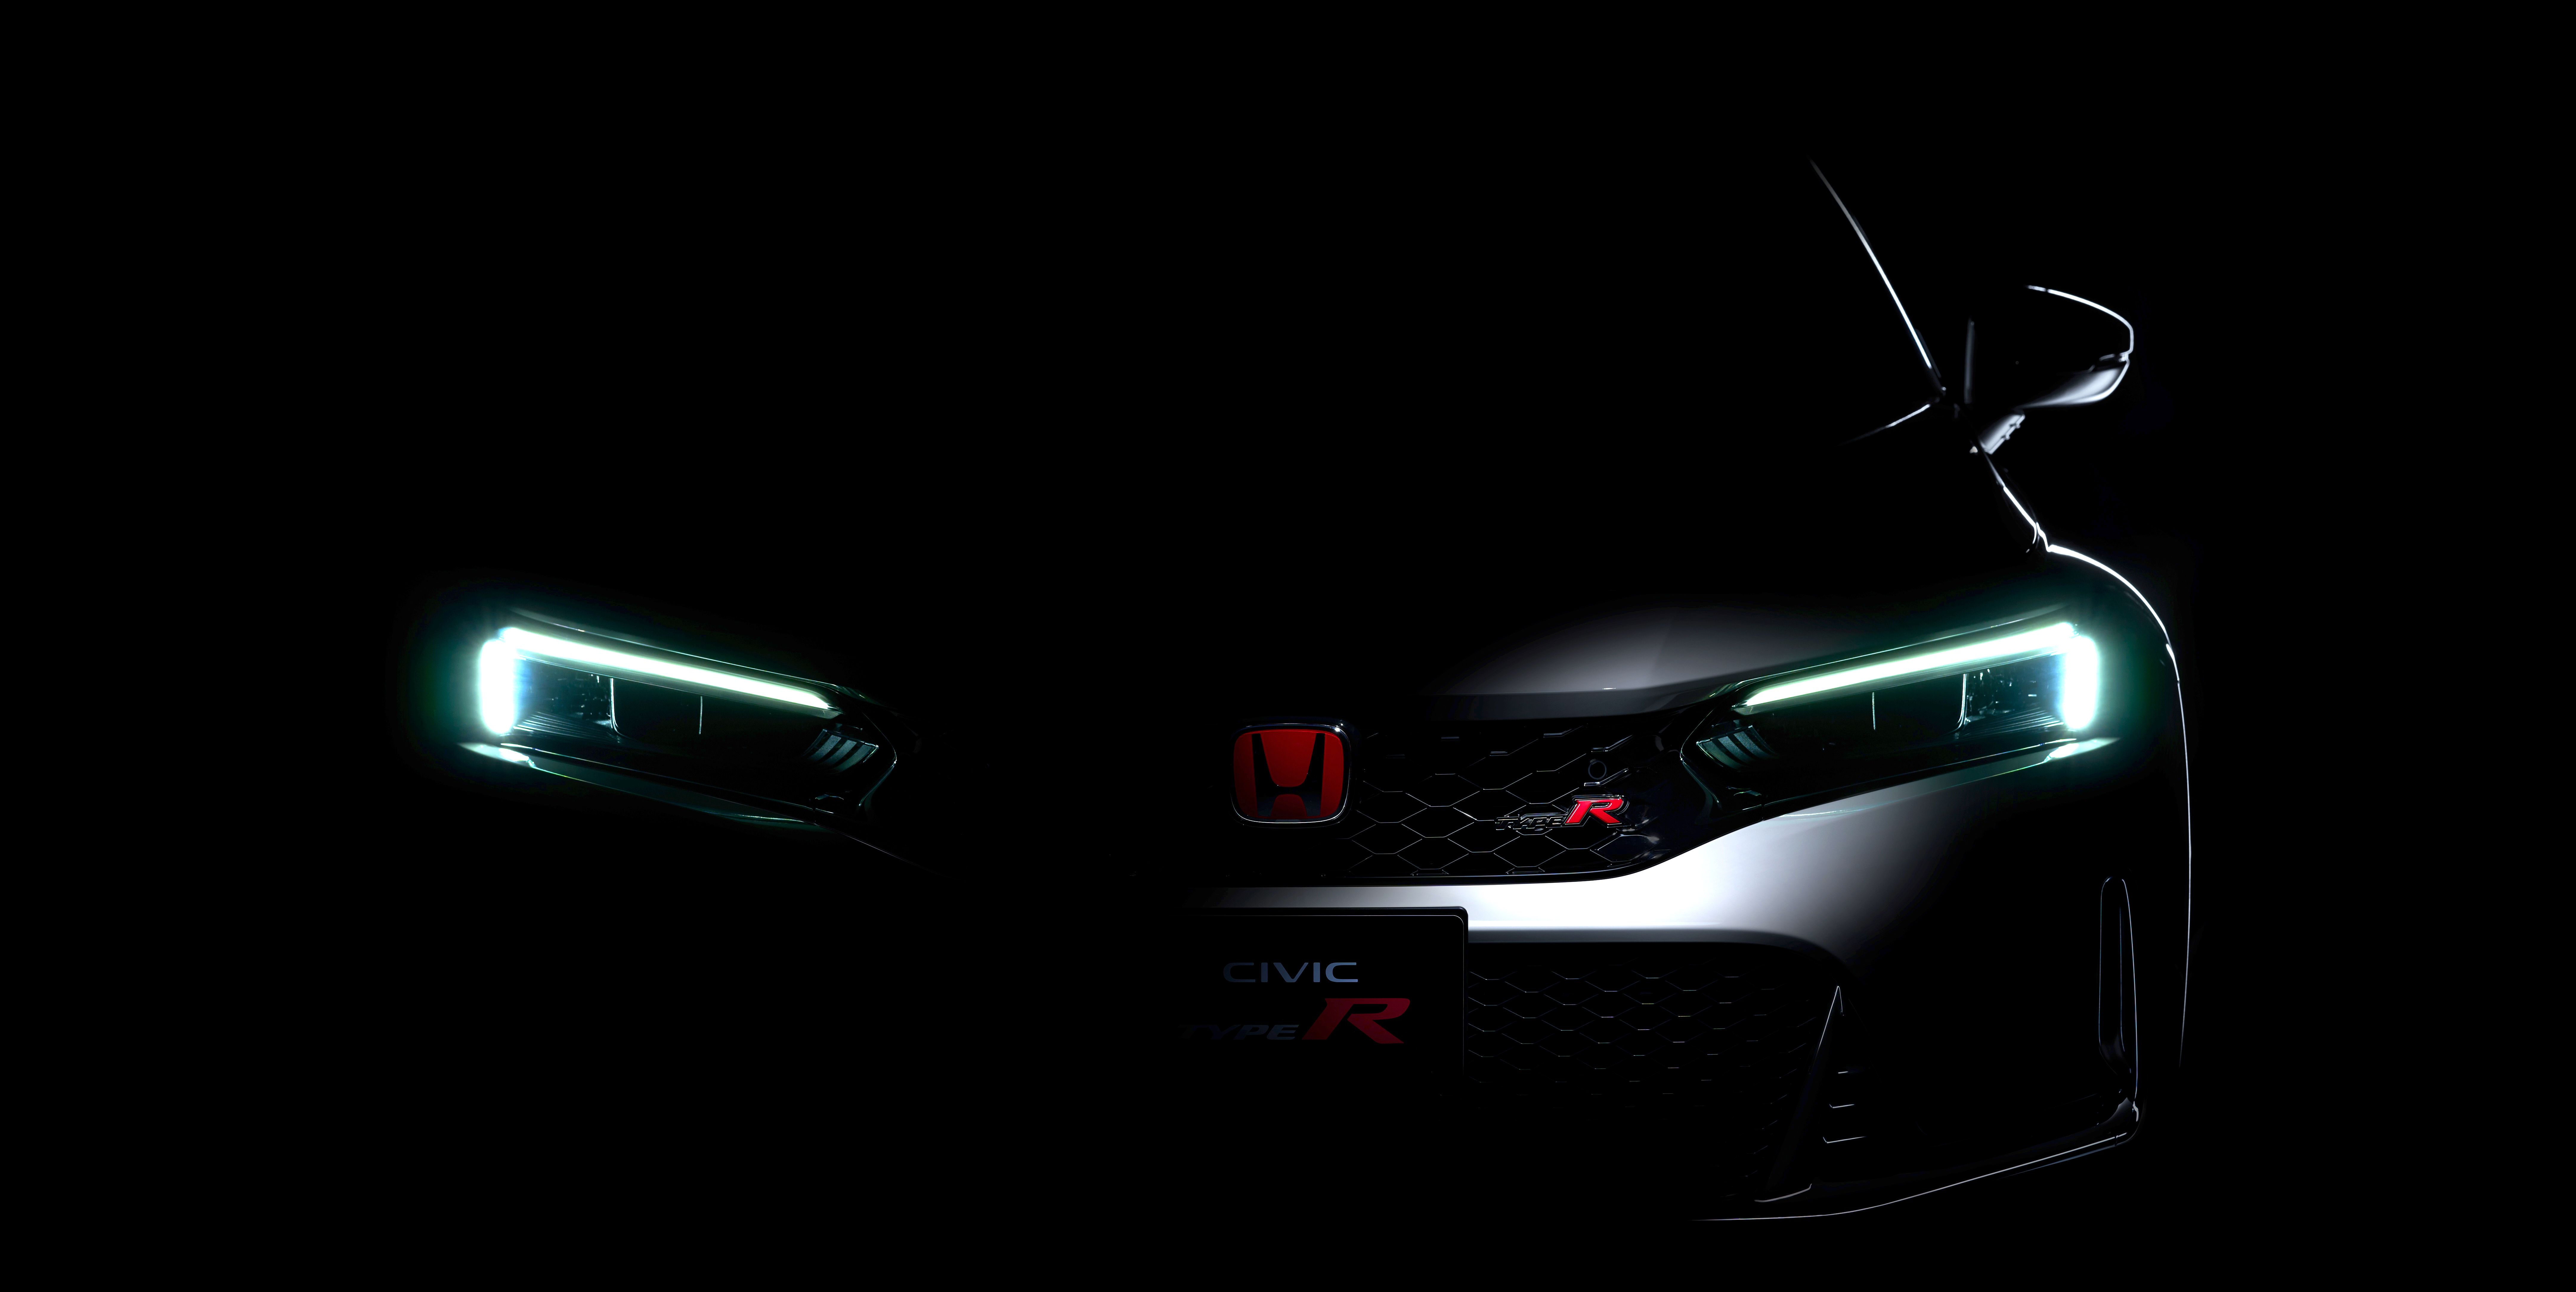 Here's Your First Look at the Uncamouflaged 2023 Honda Civic Type R